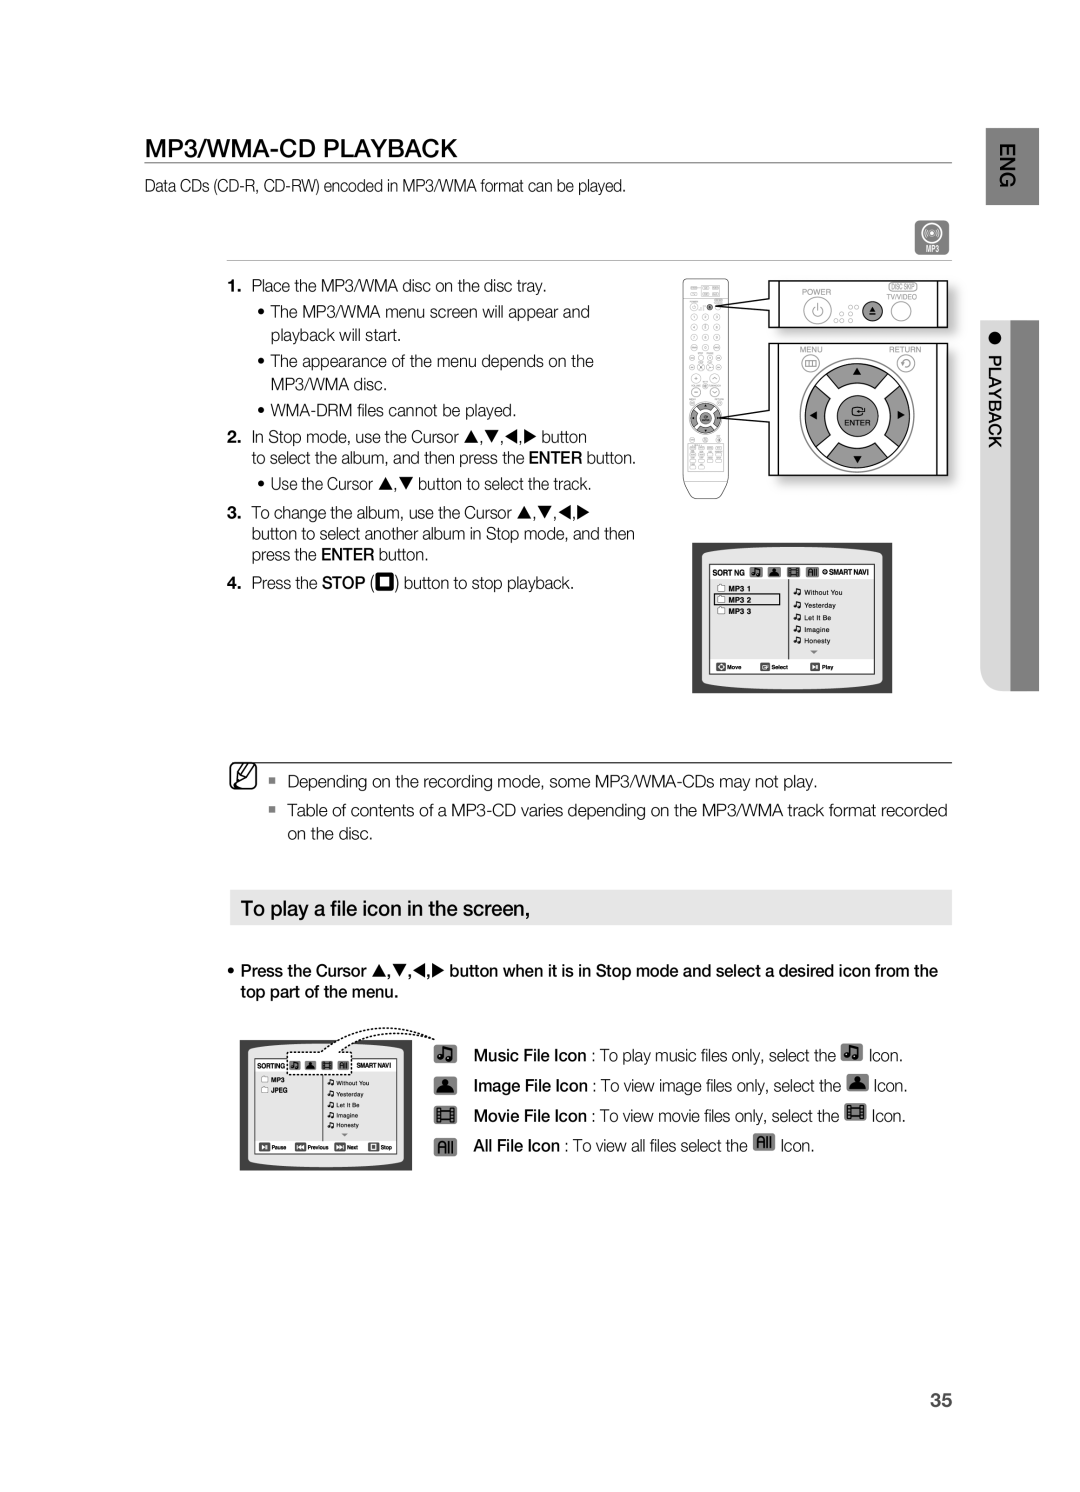 Samsung HT-TWZ415 user manual MP3/WMA-CDPLAYBACK, To play a file icon in the screen 